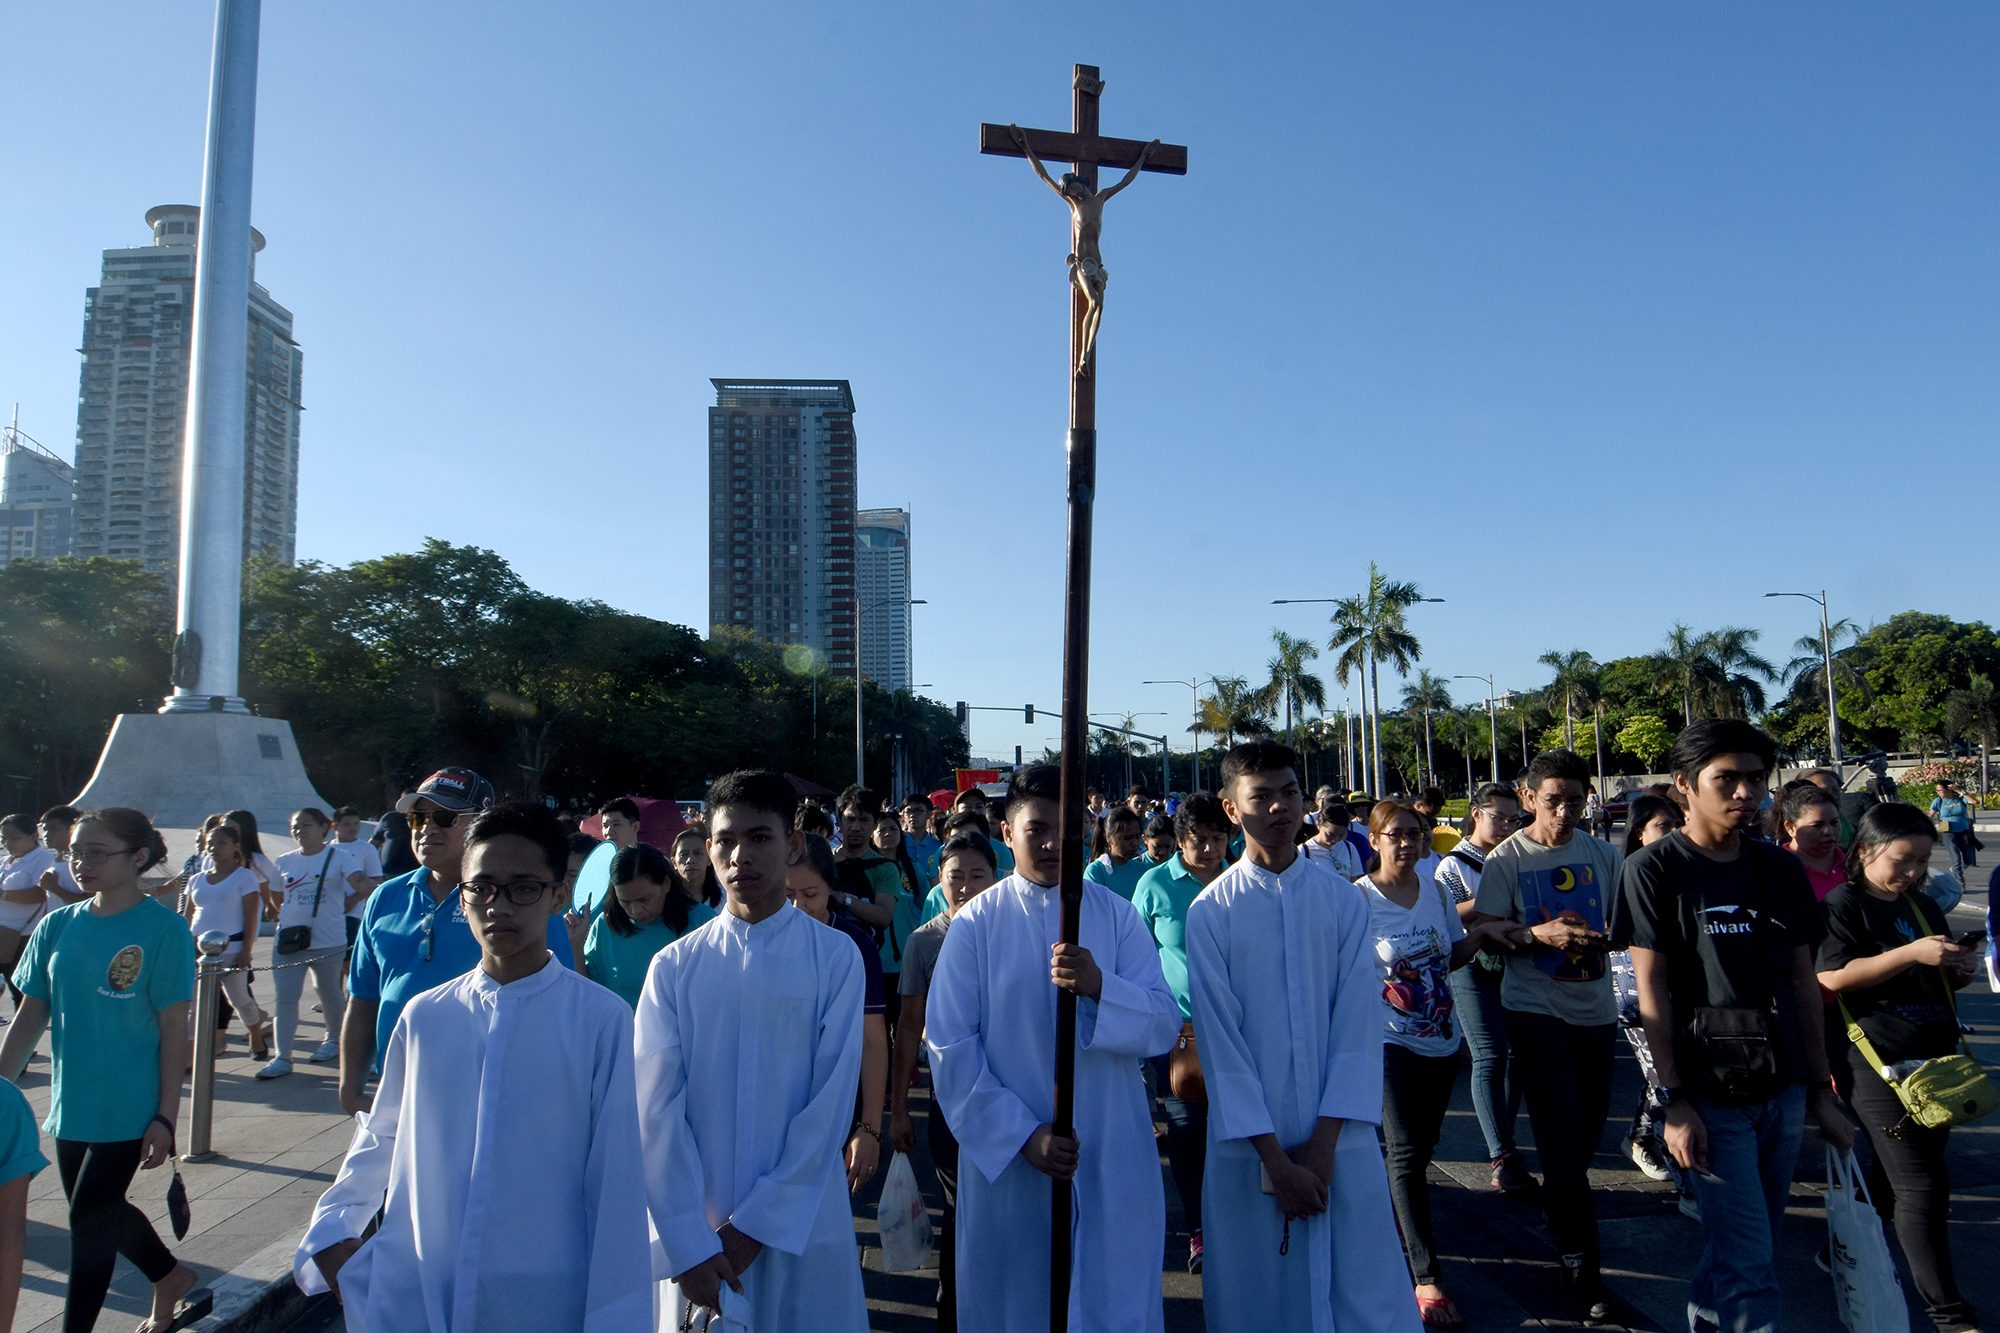 IN PHOTOS: Penitential ‘Walk for Life’ on Good Friday